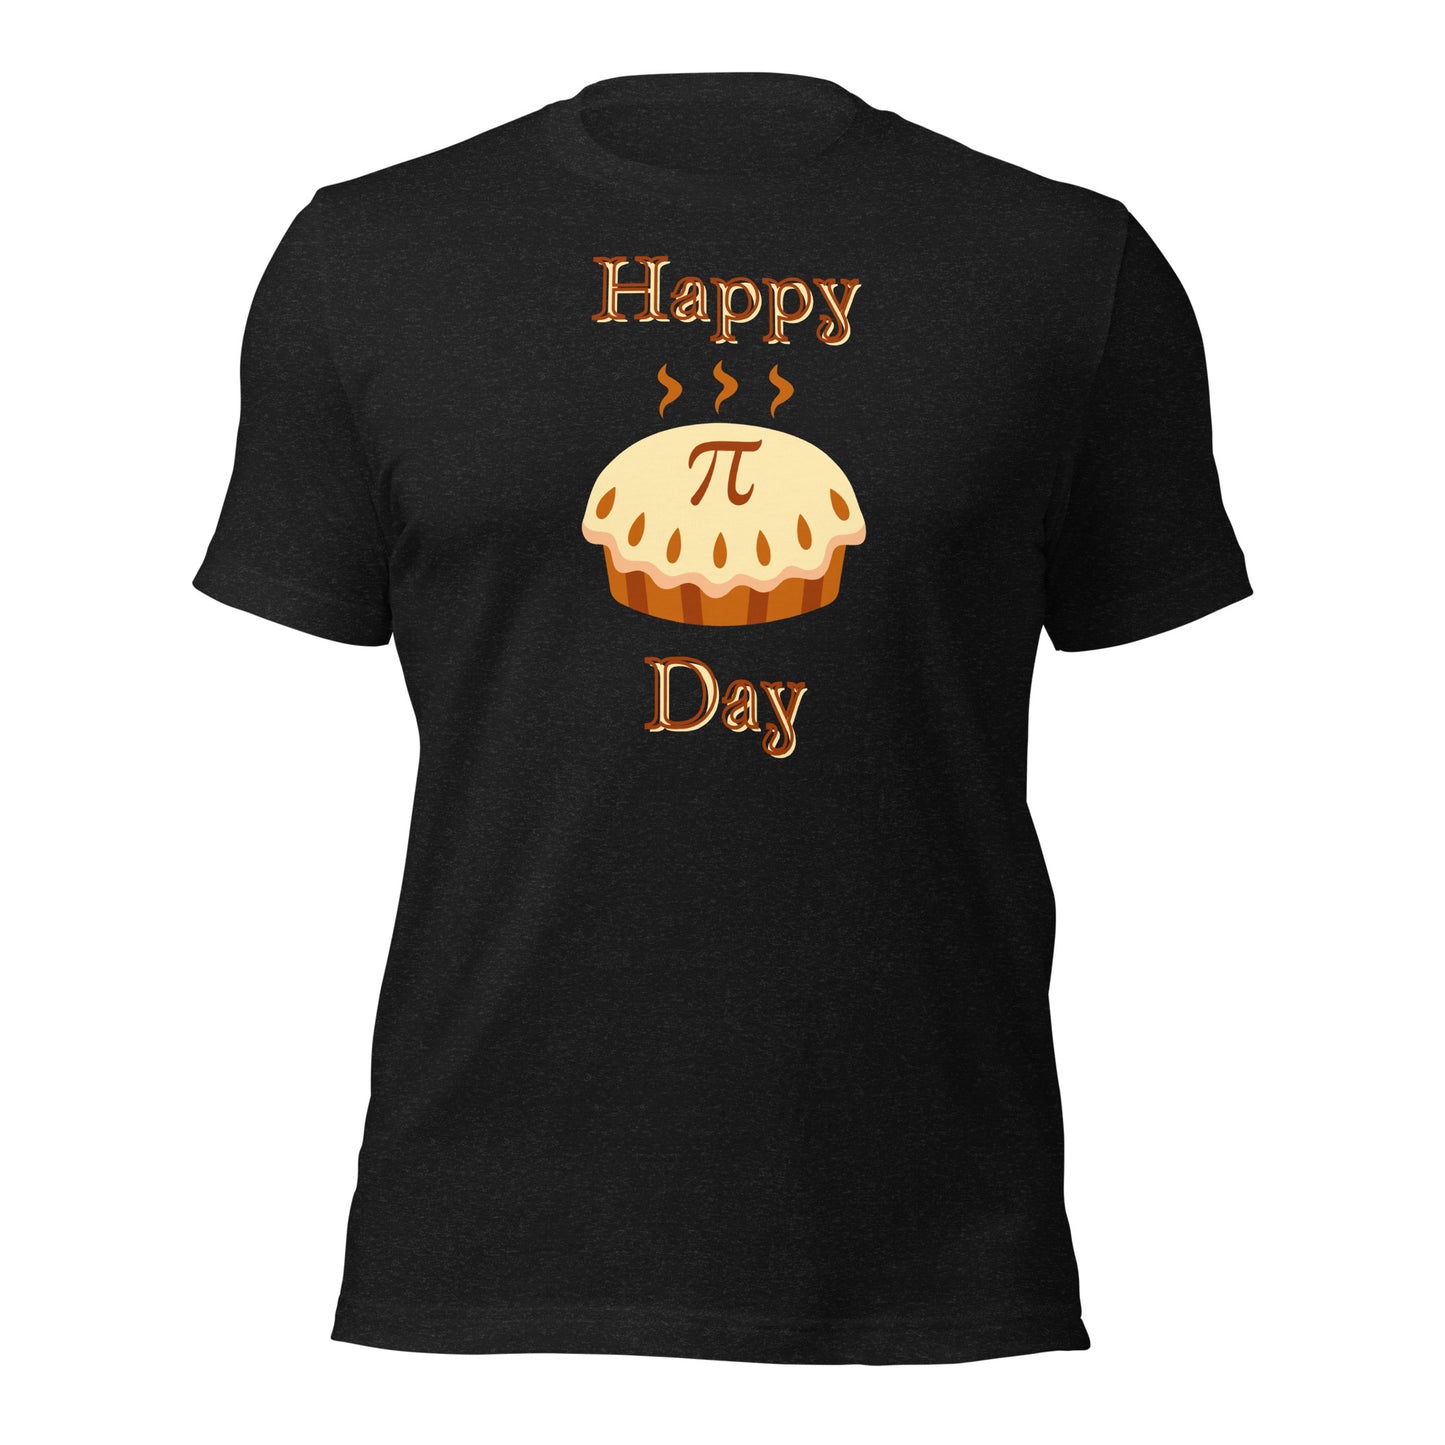 Soft, ring-spun cotton Pi Day shirt in various colors